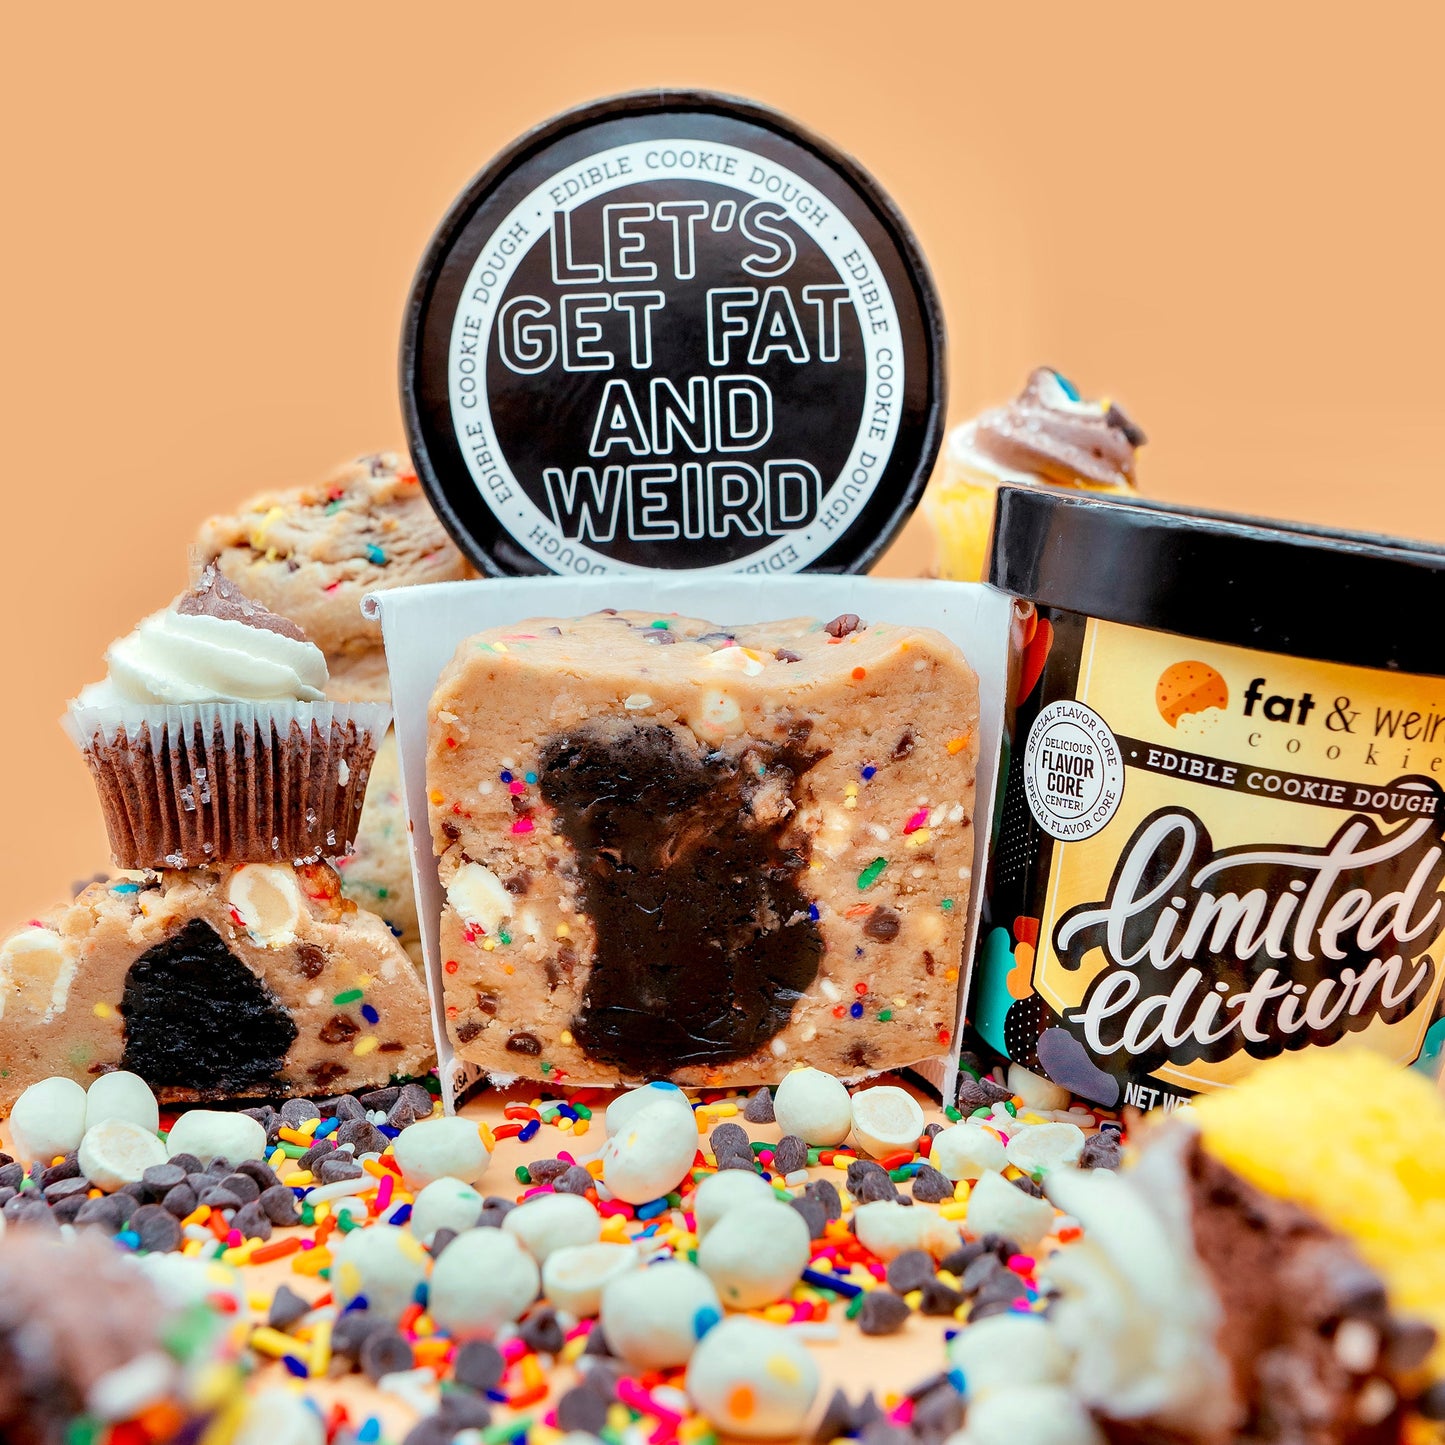 Limited Edition Edible Cookie Dough - Two Faced Cookie Dough Fat & Weird Cookie 